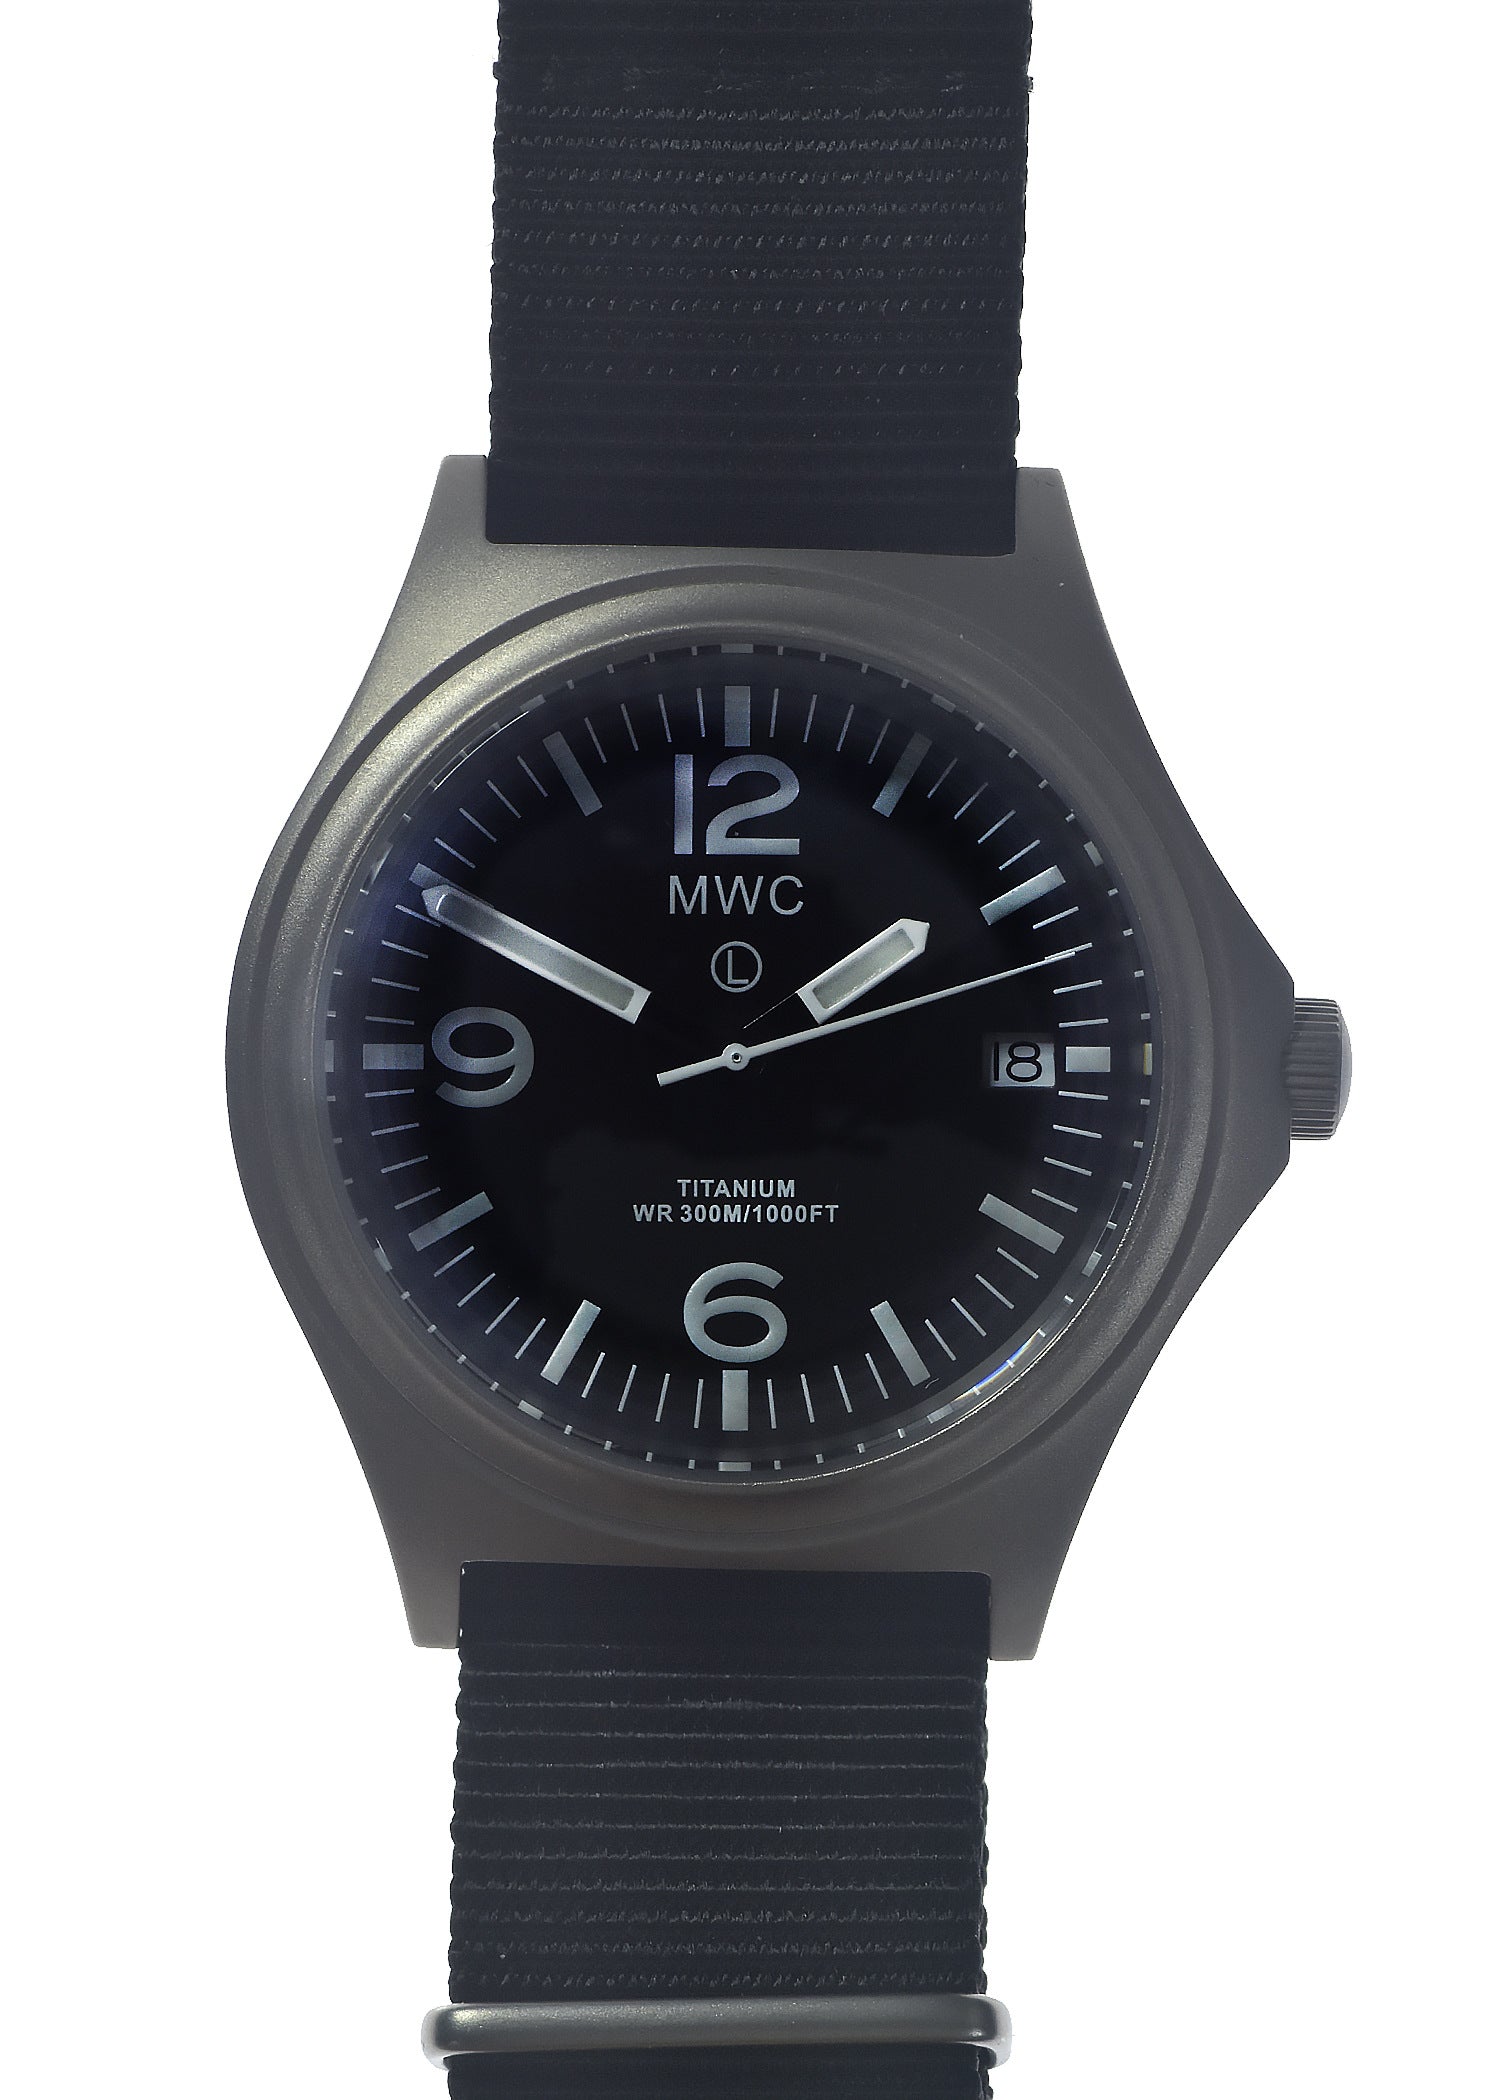 MWC Titanium Military Watch, 300m Water Resistant, Sapphire 